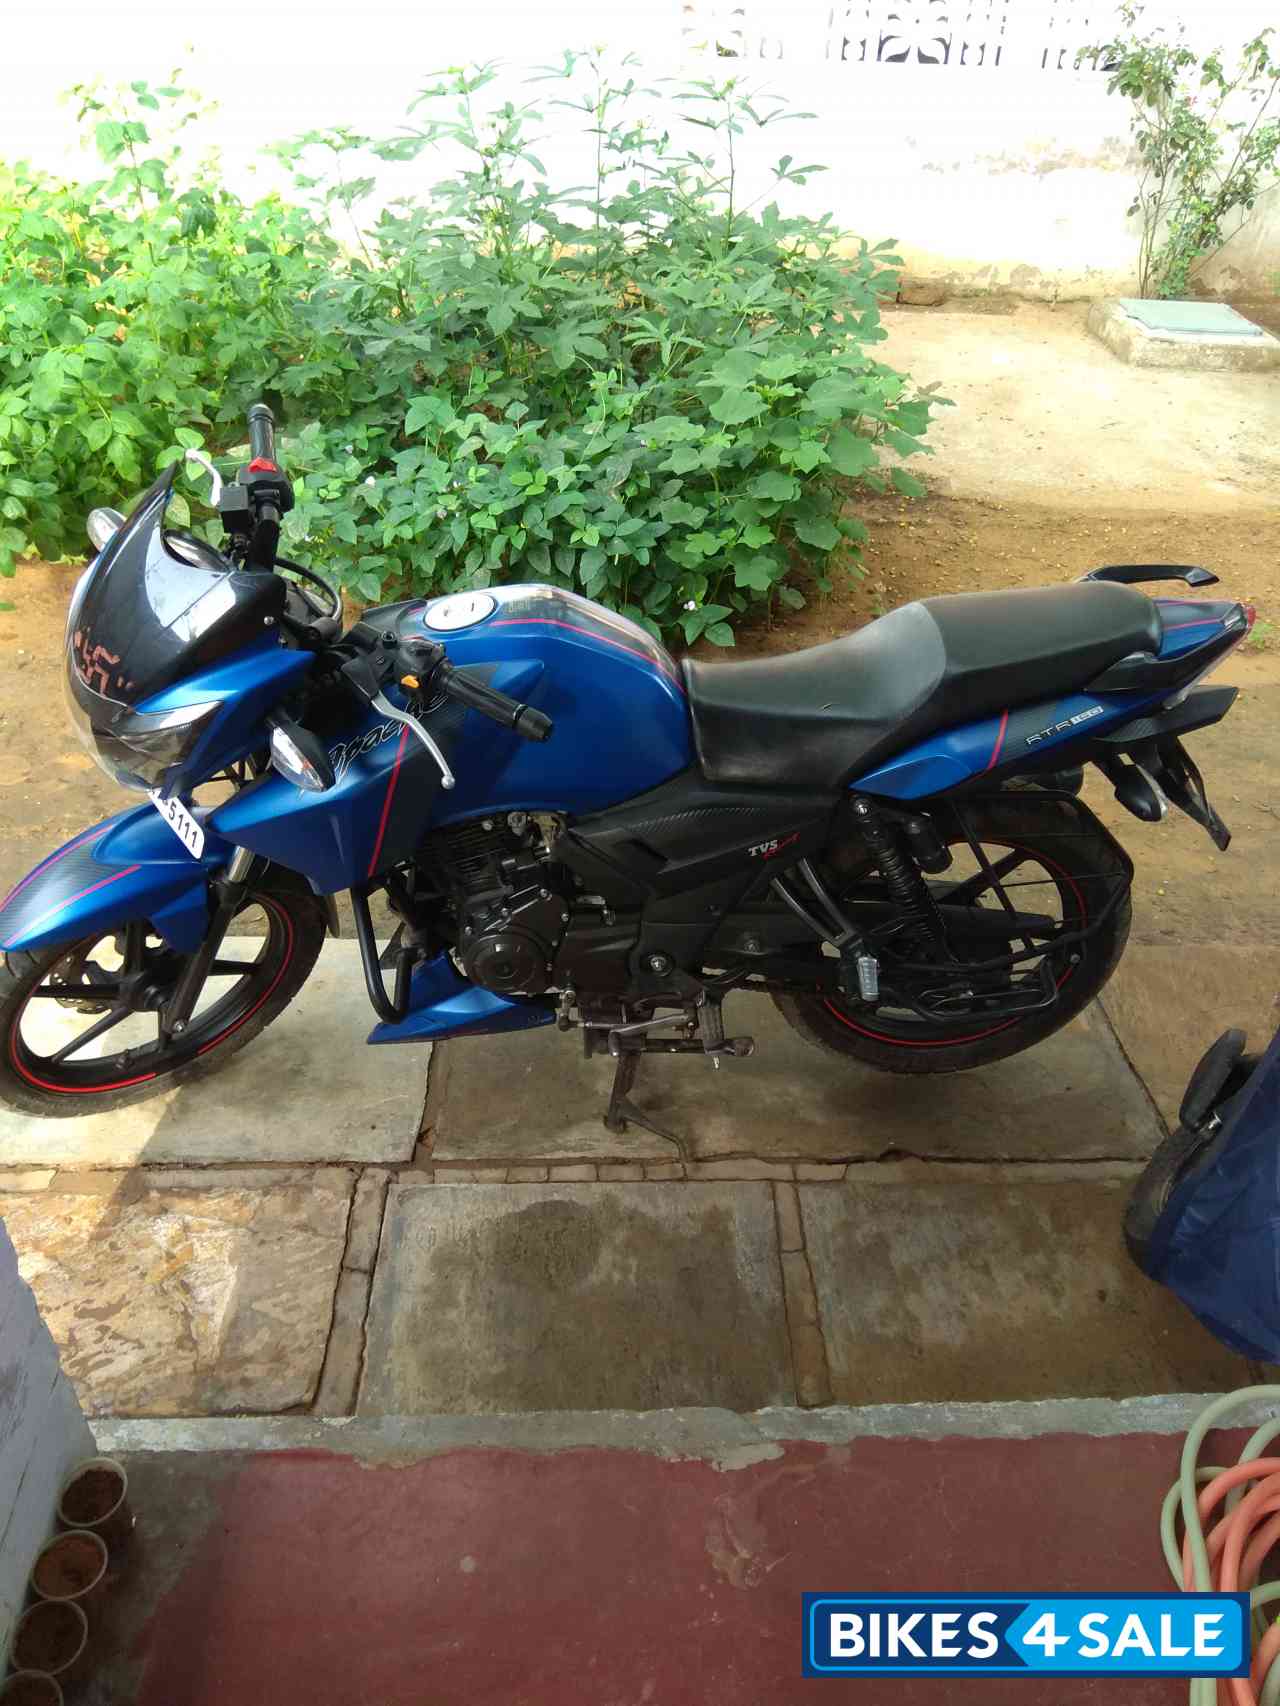 Used 2017 model TVS Apache RTR 160 for sale in Jaipur. ID 225471 